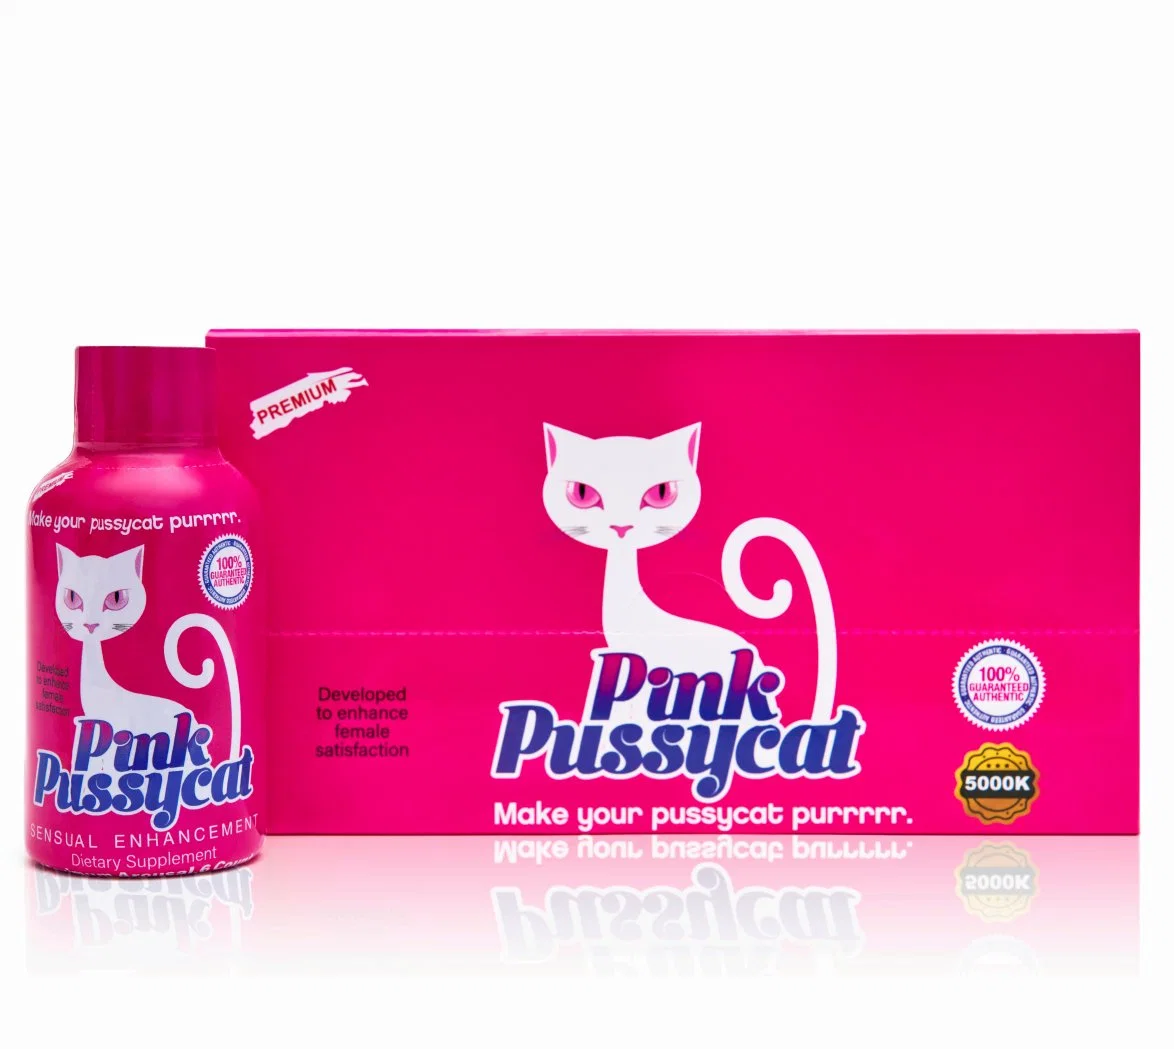 aly harrison add photo hot pink pussy shot